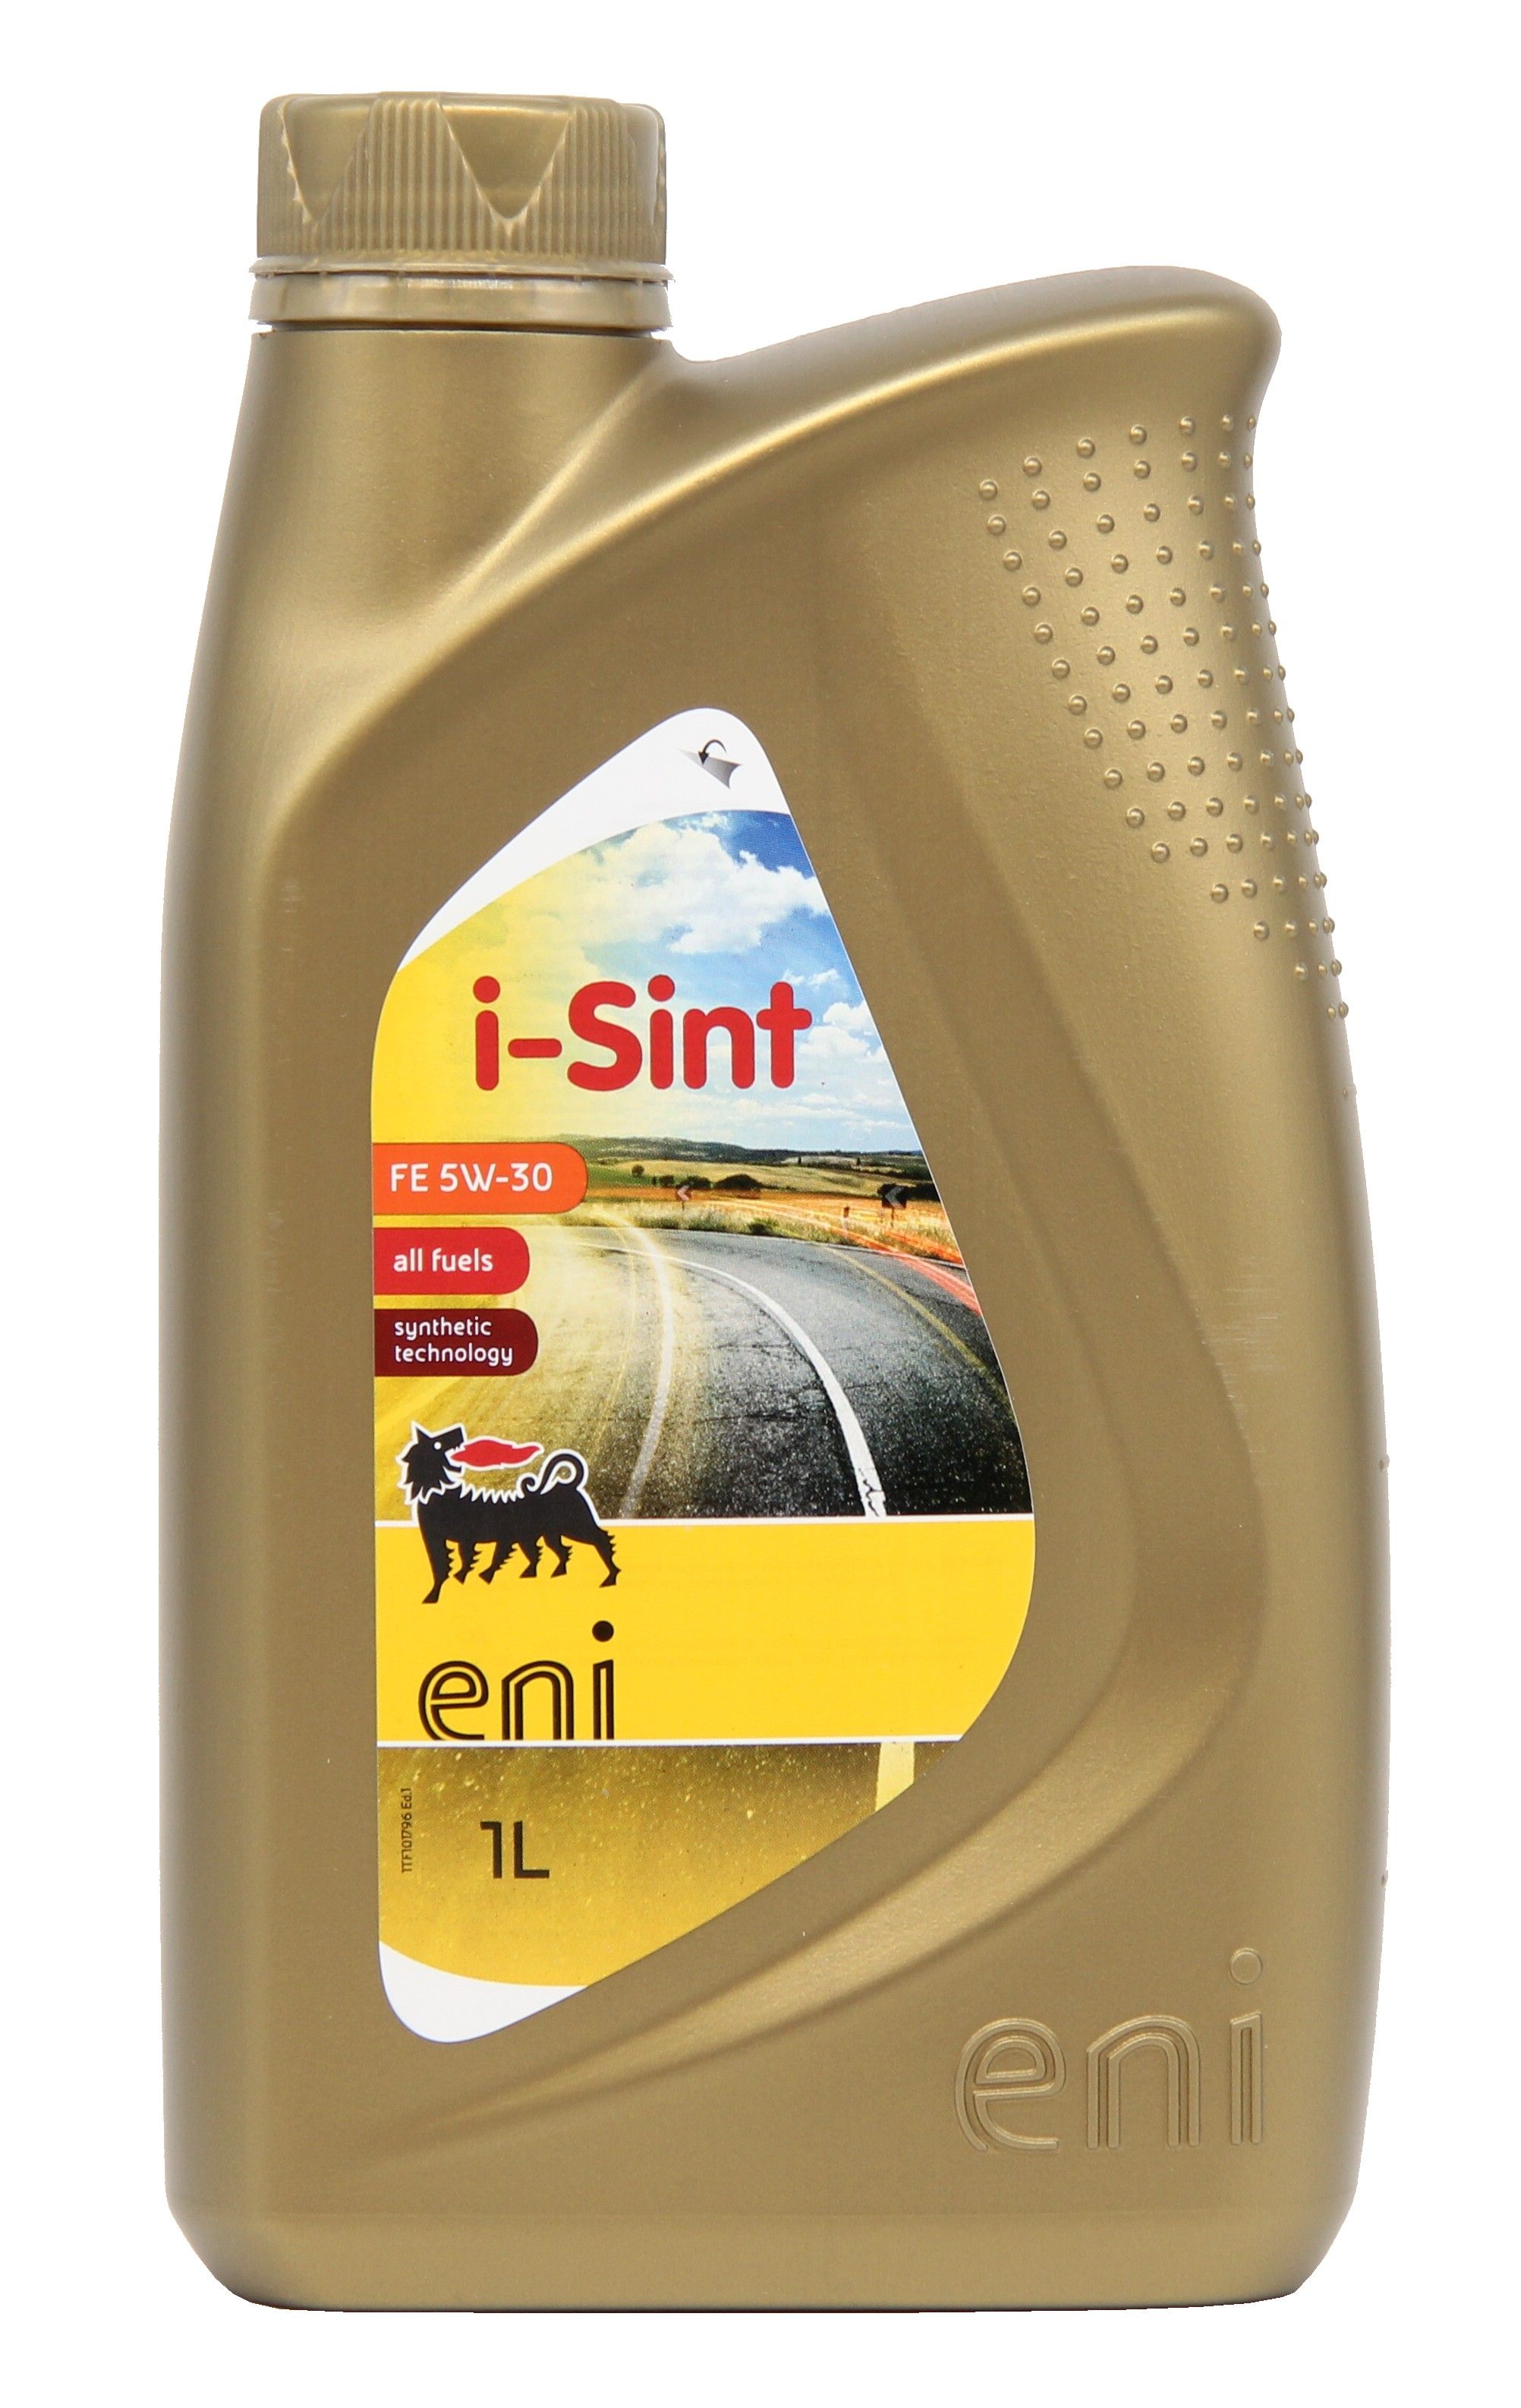 Масло eni 5w 30. Моторное масло Eni i-Sint 5w30. Масло i Sint 5w 30. Eni i-Sint 5w-30. Моторное масло Eni 10w 40.